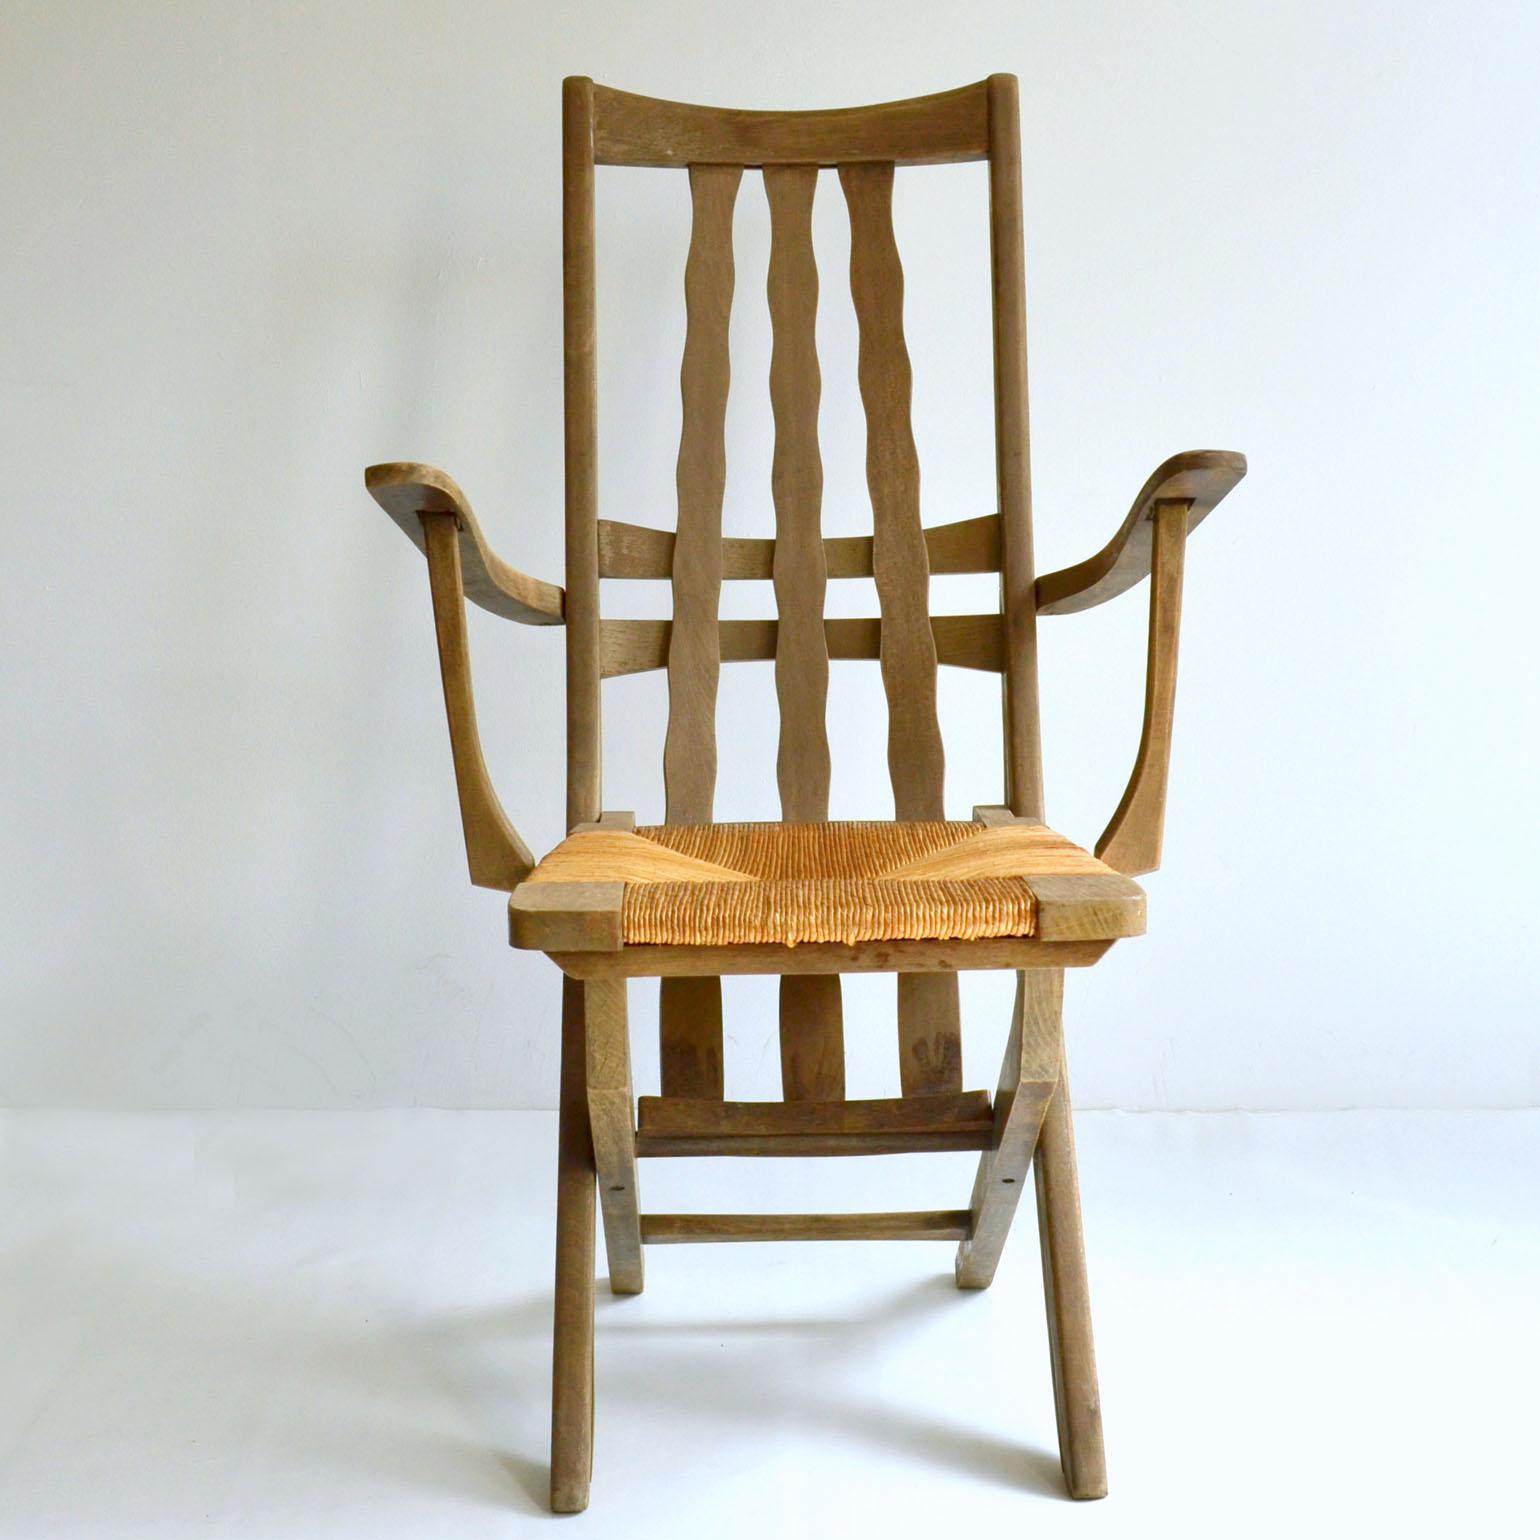 Pair of French Modernist Outdoor Oak Chairs, French, 1950s For Sale 1